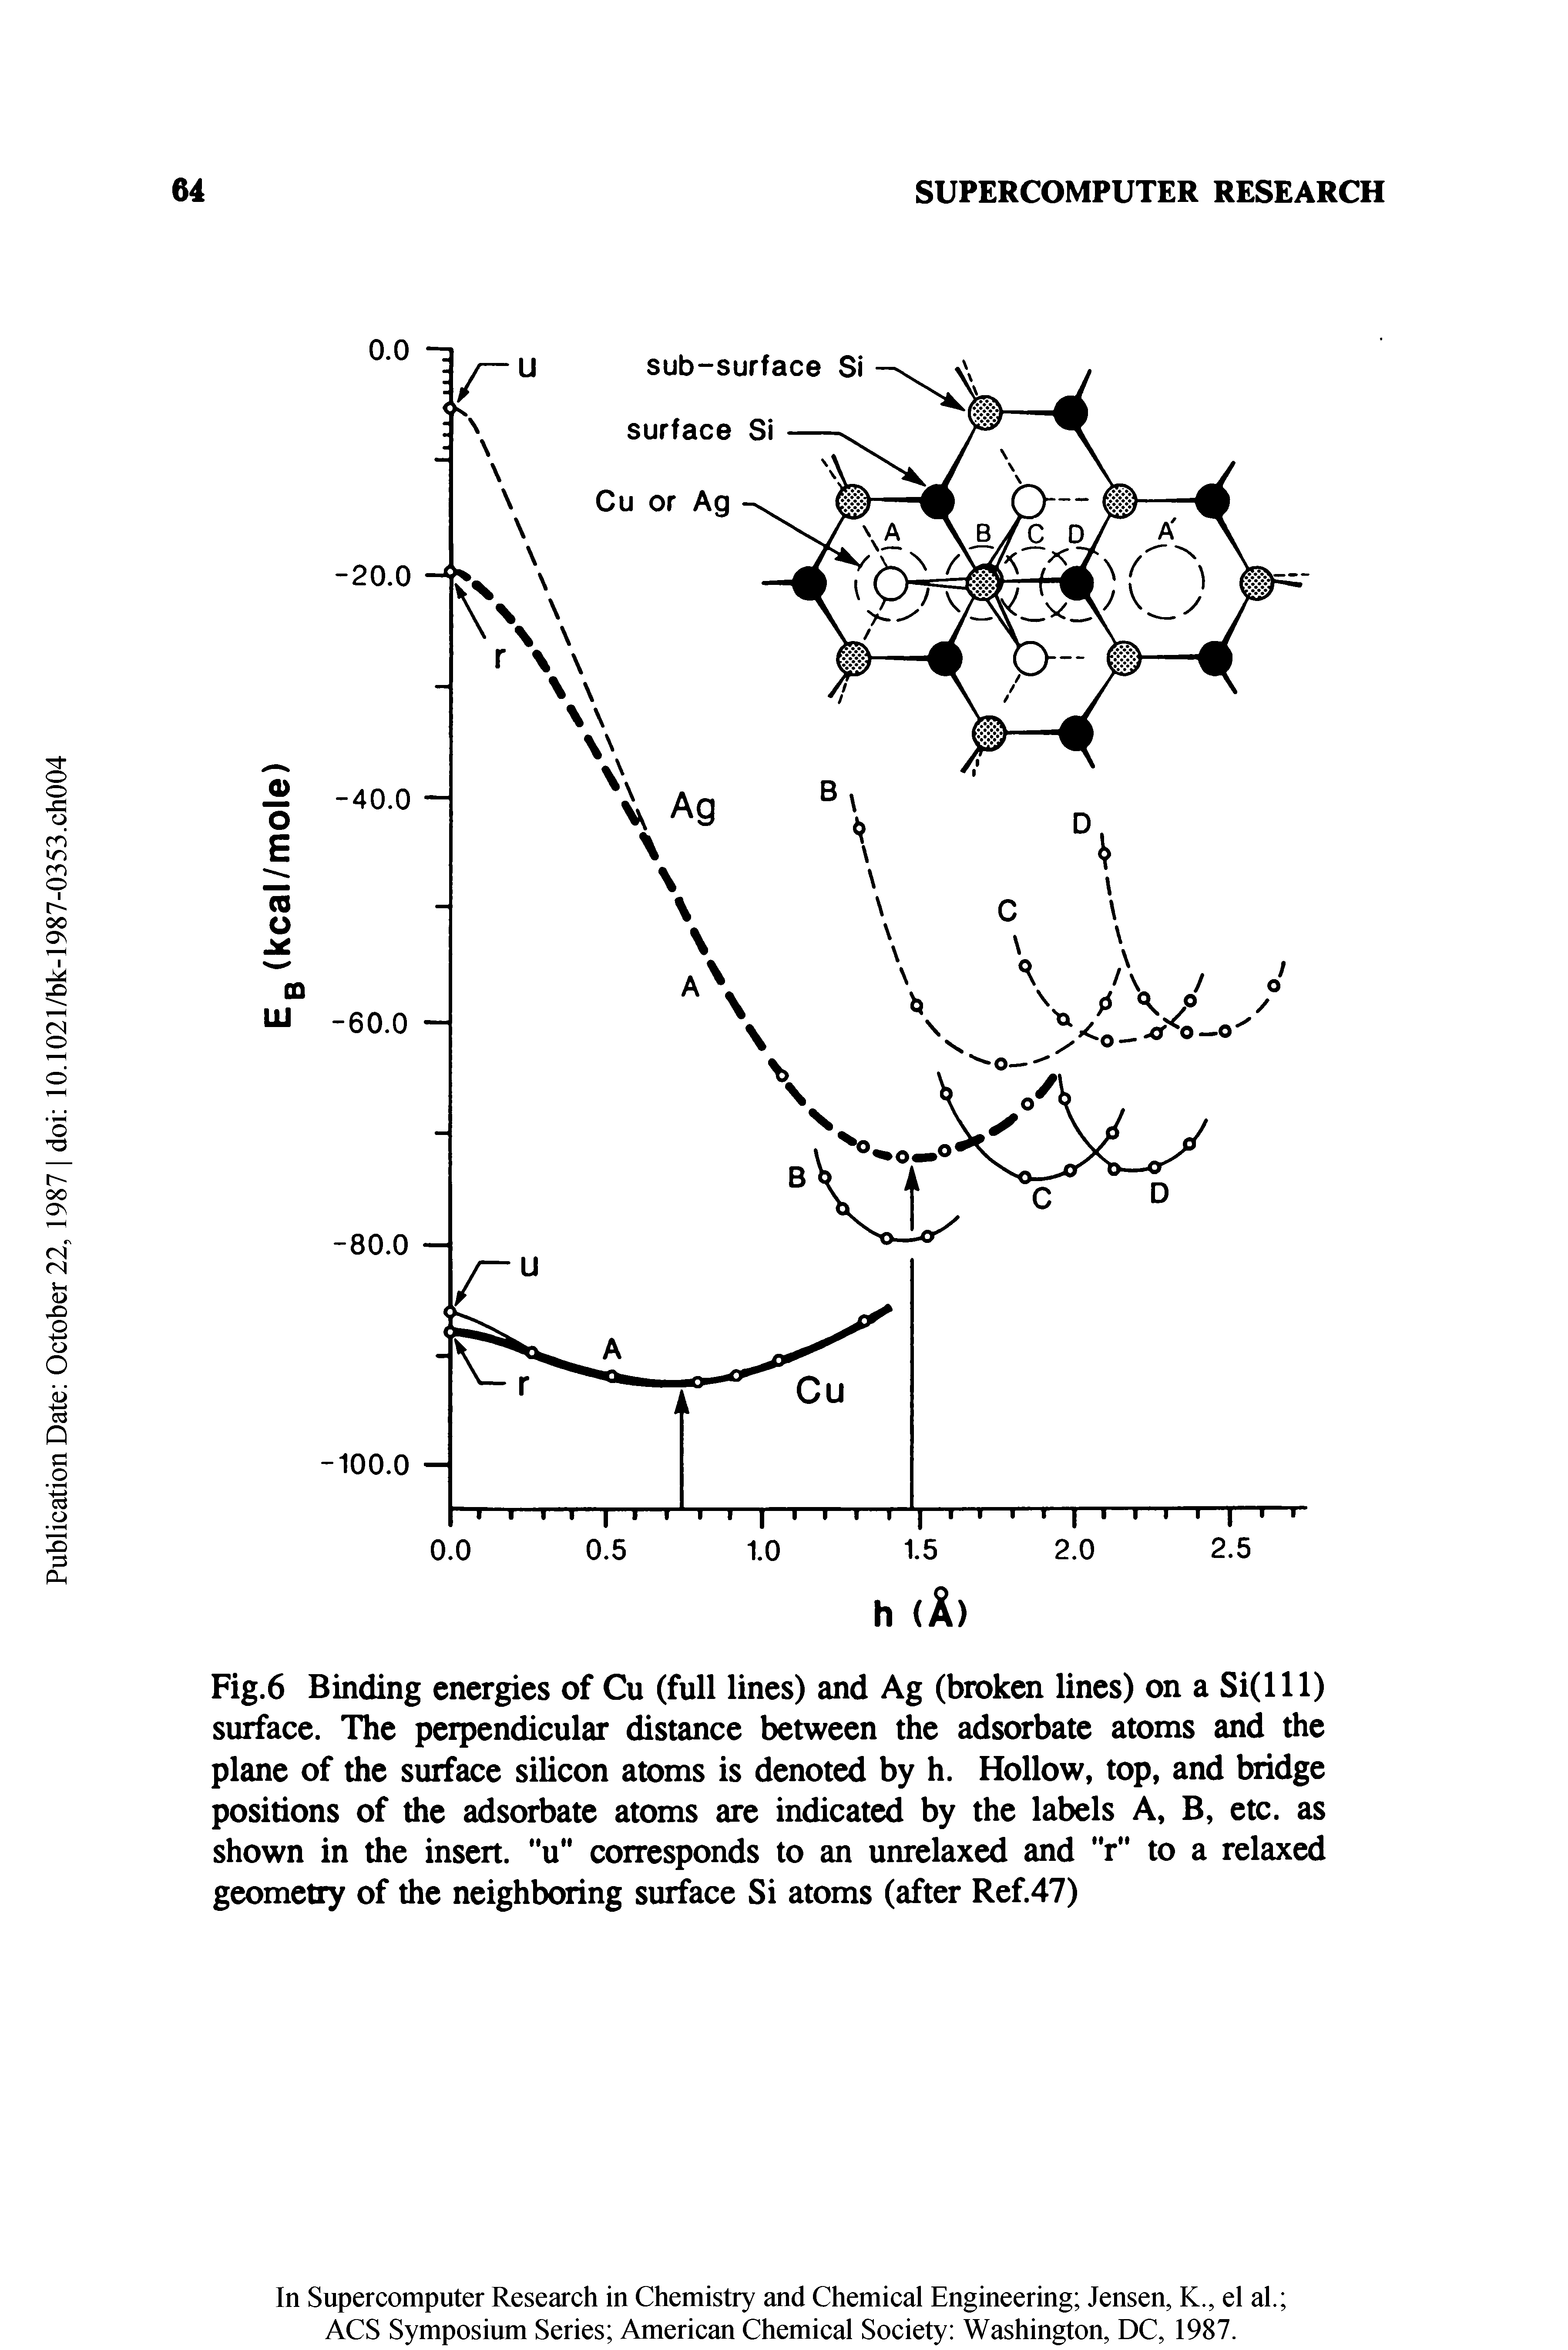 Fig.6 Binding energies of Cu (full lines) and Ag (broken lines) on a Si(lll) surface. The perpendicular distance between the adsorbate atoms and the plane of the surface silicon atoms is denoted by h. Hollow, top, and bridge positions of the adsorbate atoms are indicated by the labels A, B, etc. as shown in the insert, u corresponds to an unrelaxed and r to a relaxed geometry of the neighboring surface Si atoms (after Ref.47)...